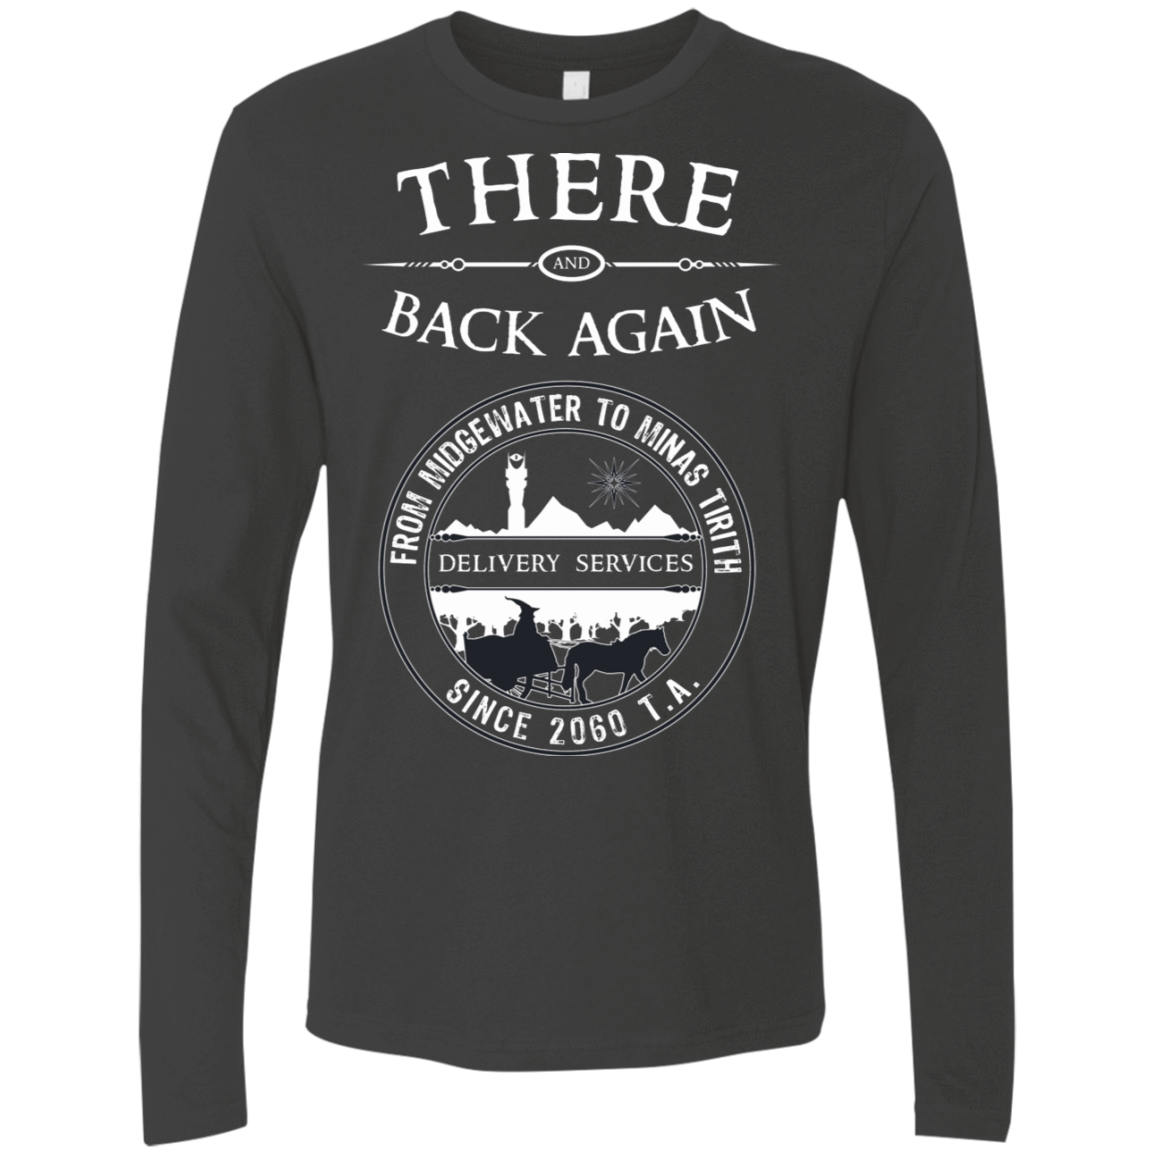 T-Shirts Heavy Metal / S There and Back Again Men's Premium Long Sleeve